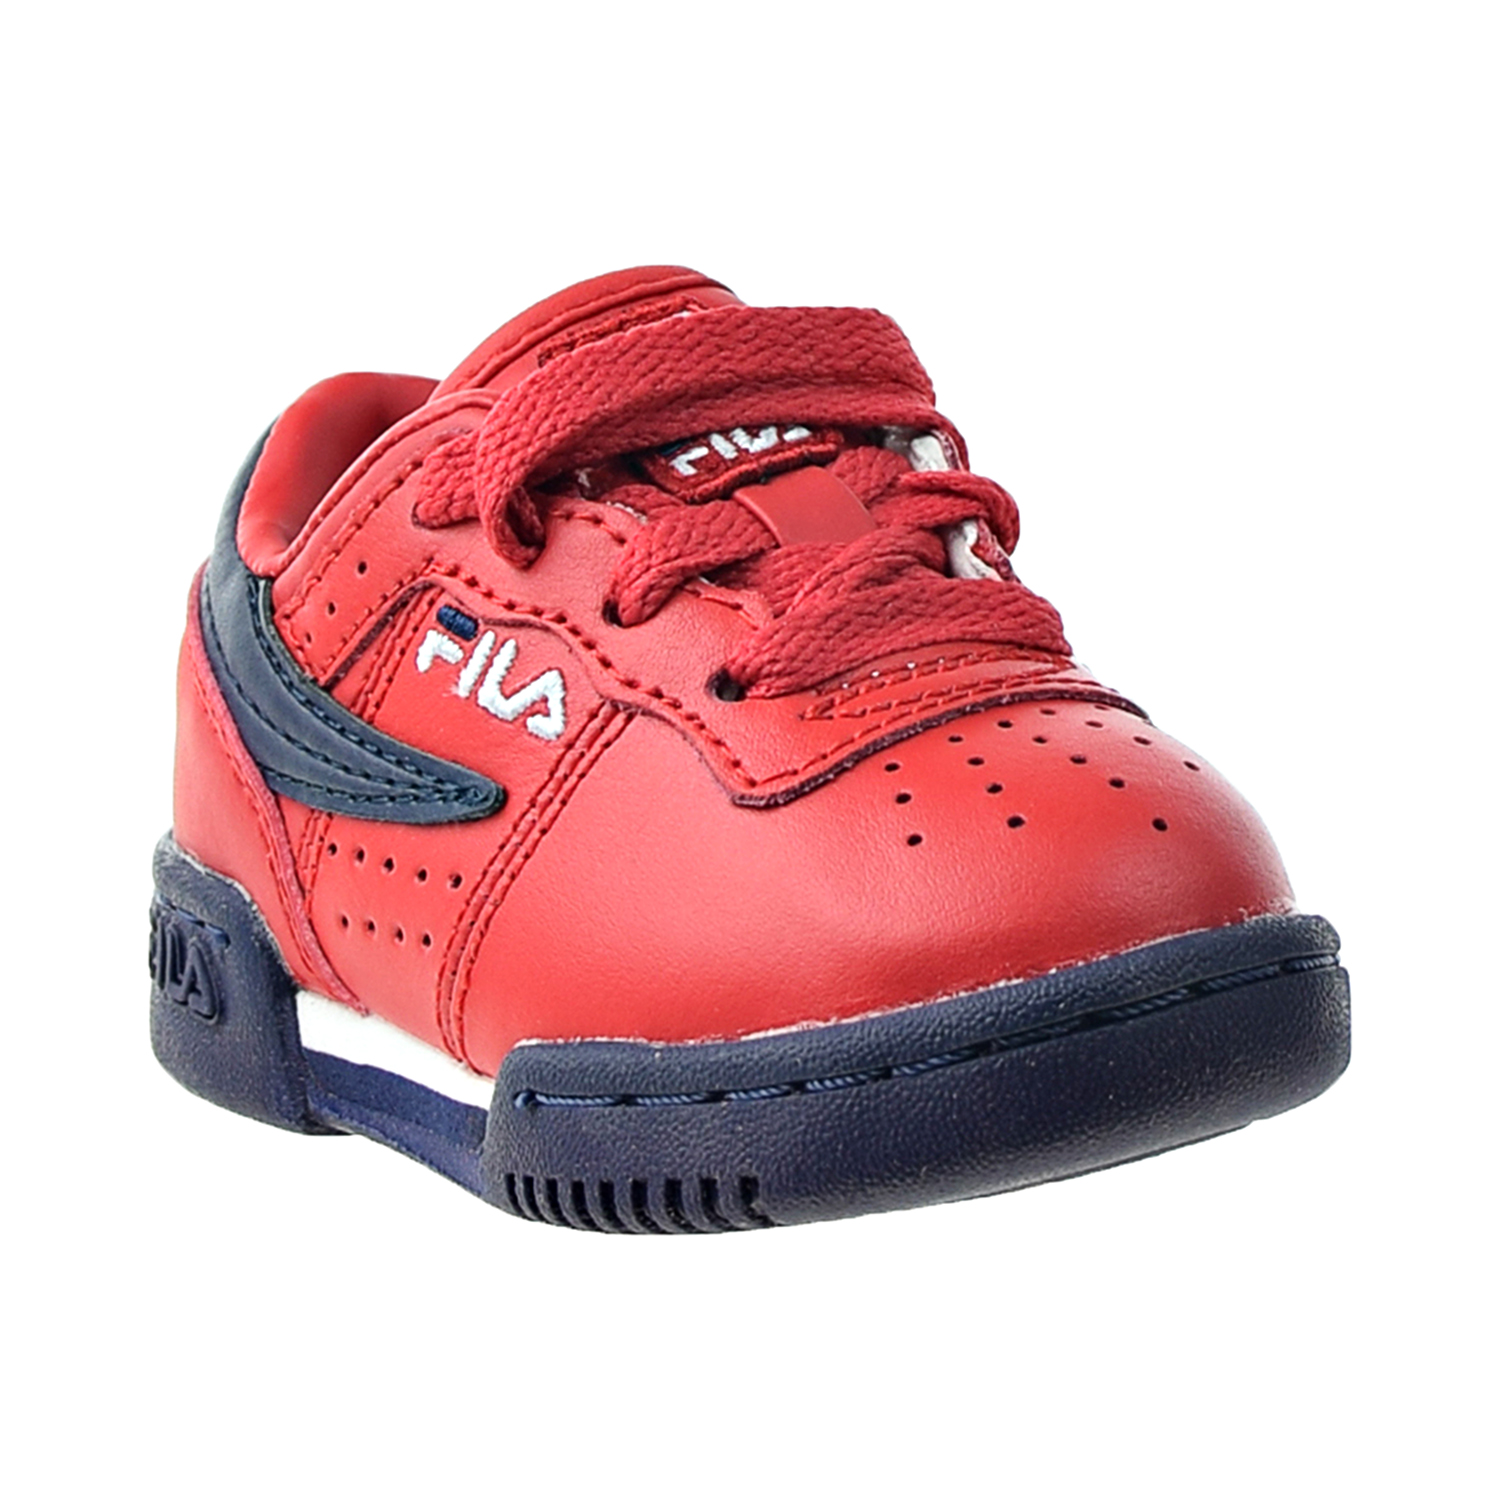 Fila Original Fitness Toddlers' Shoes Red-Navy-White 7vf80105-640